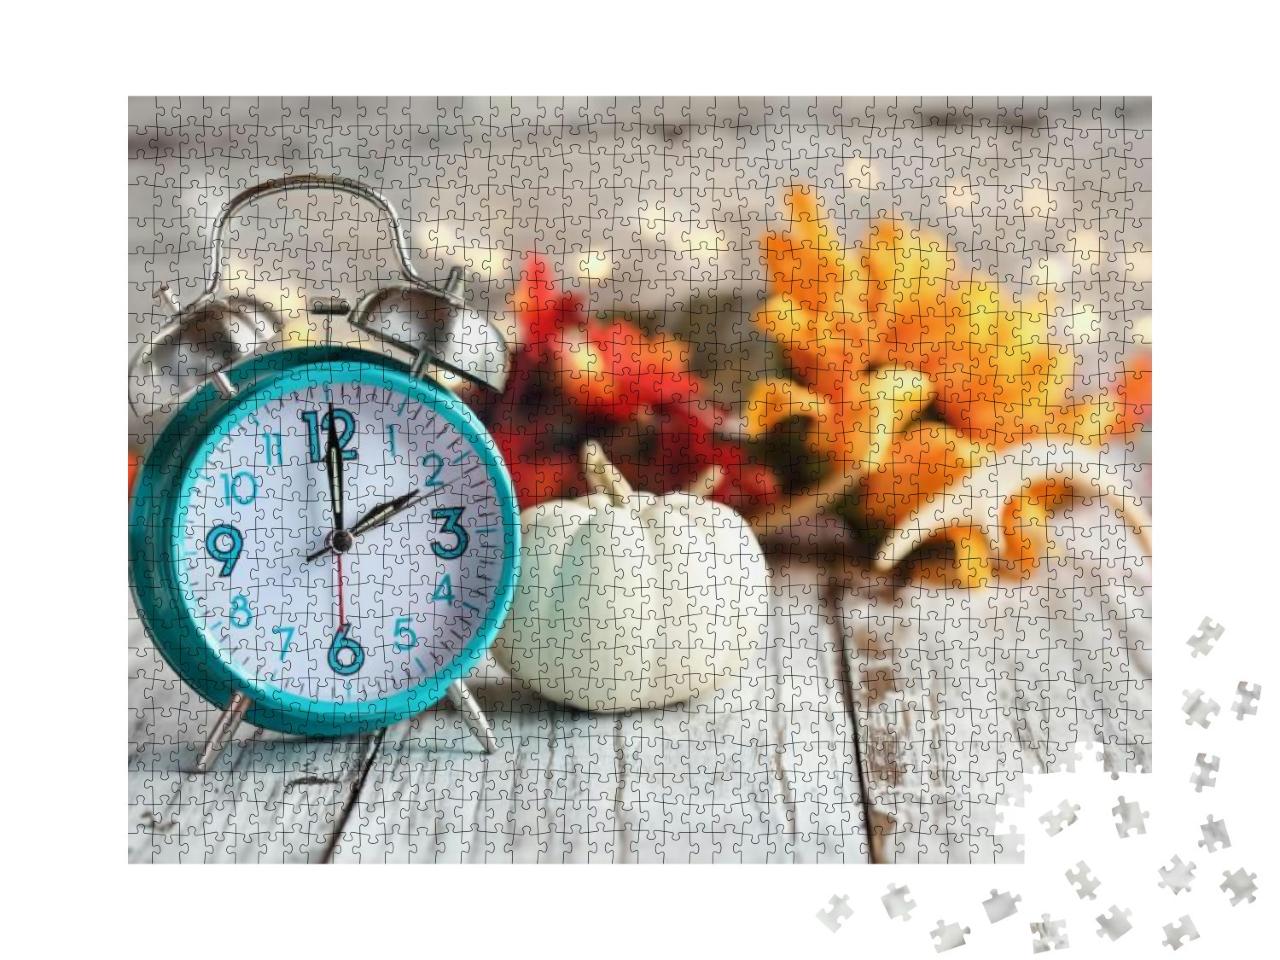 Set Your Clocks & Fall Back. Clock & Decorations of Mini... Jigsaw Puzzle with 1000 pieces